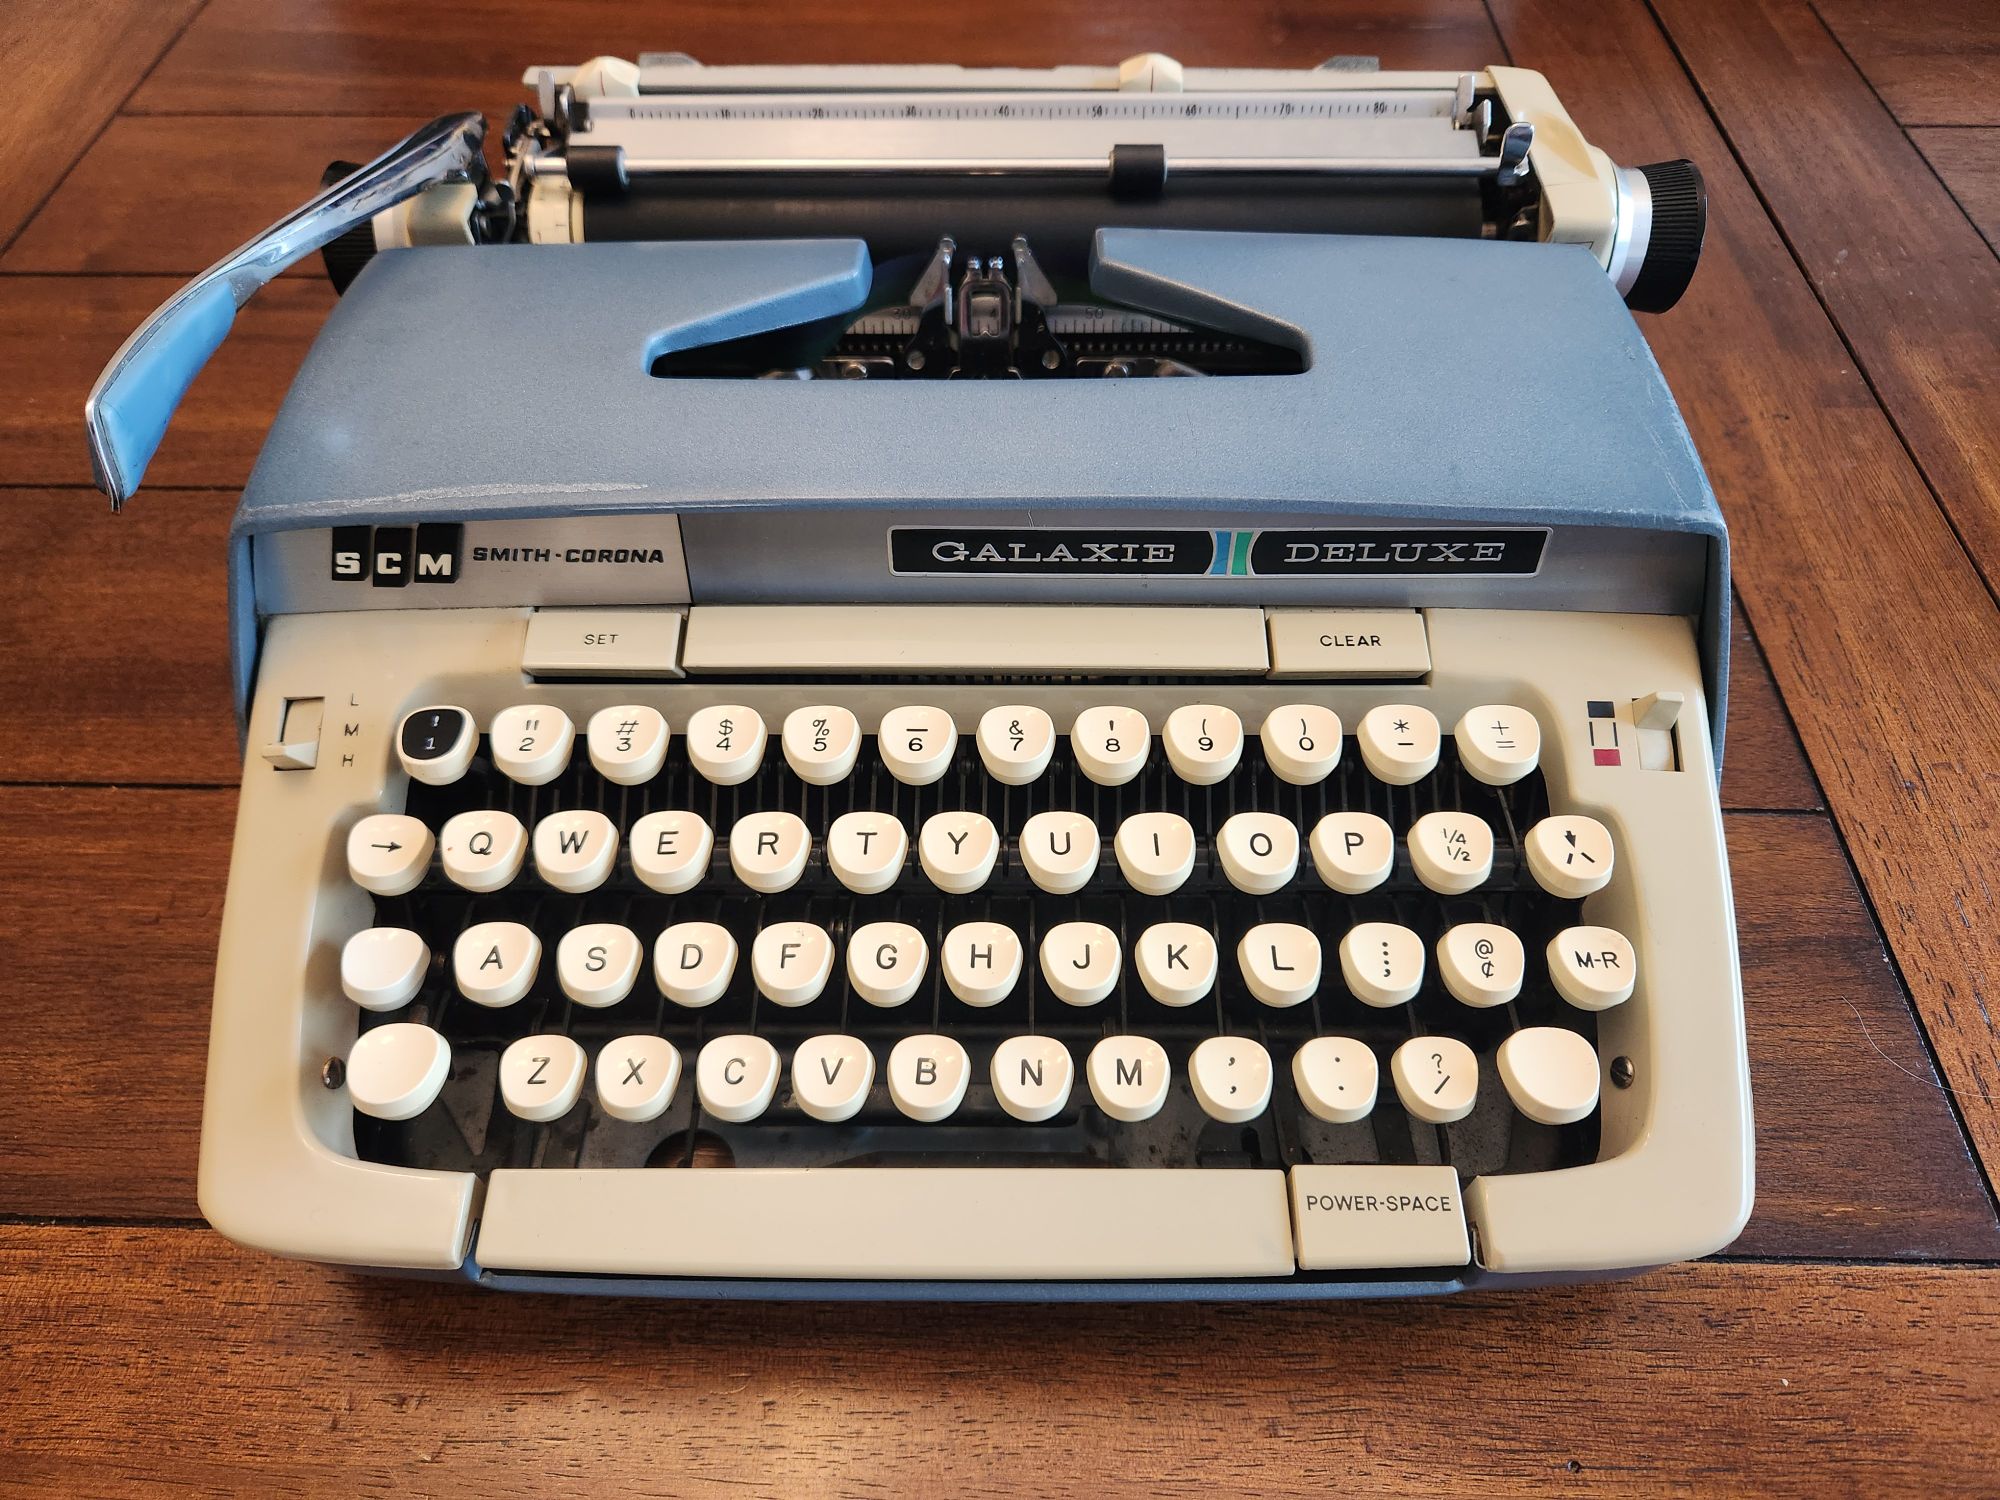 Acquisition: 196X Smith-Corona (SCM) Galaxie Deluxe 10 – 6T2V Series Manual Typewriter